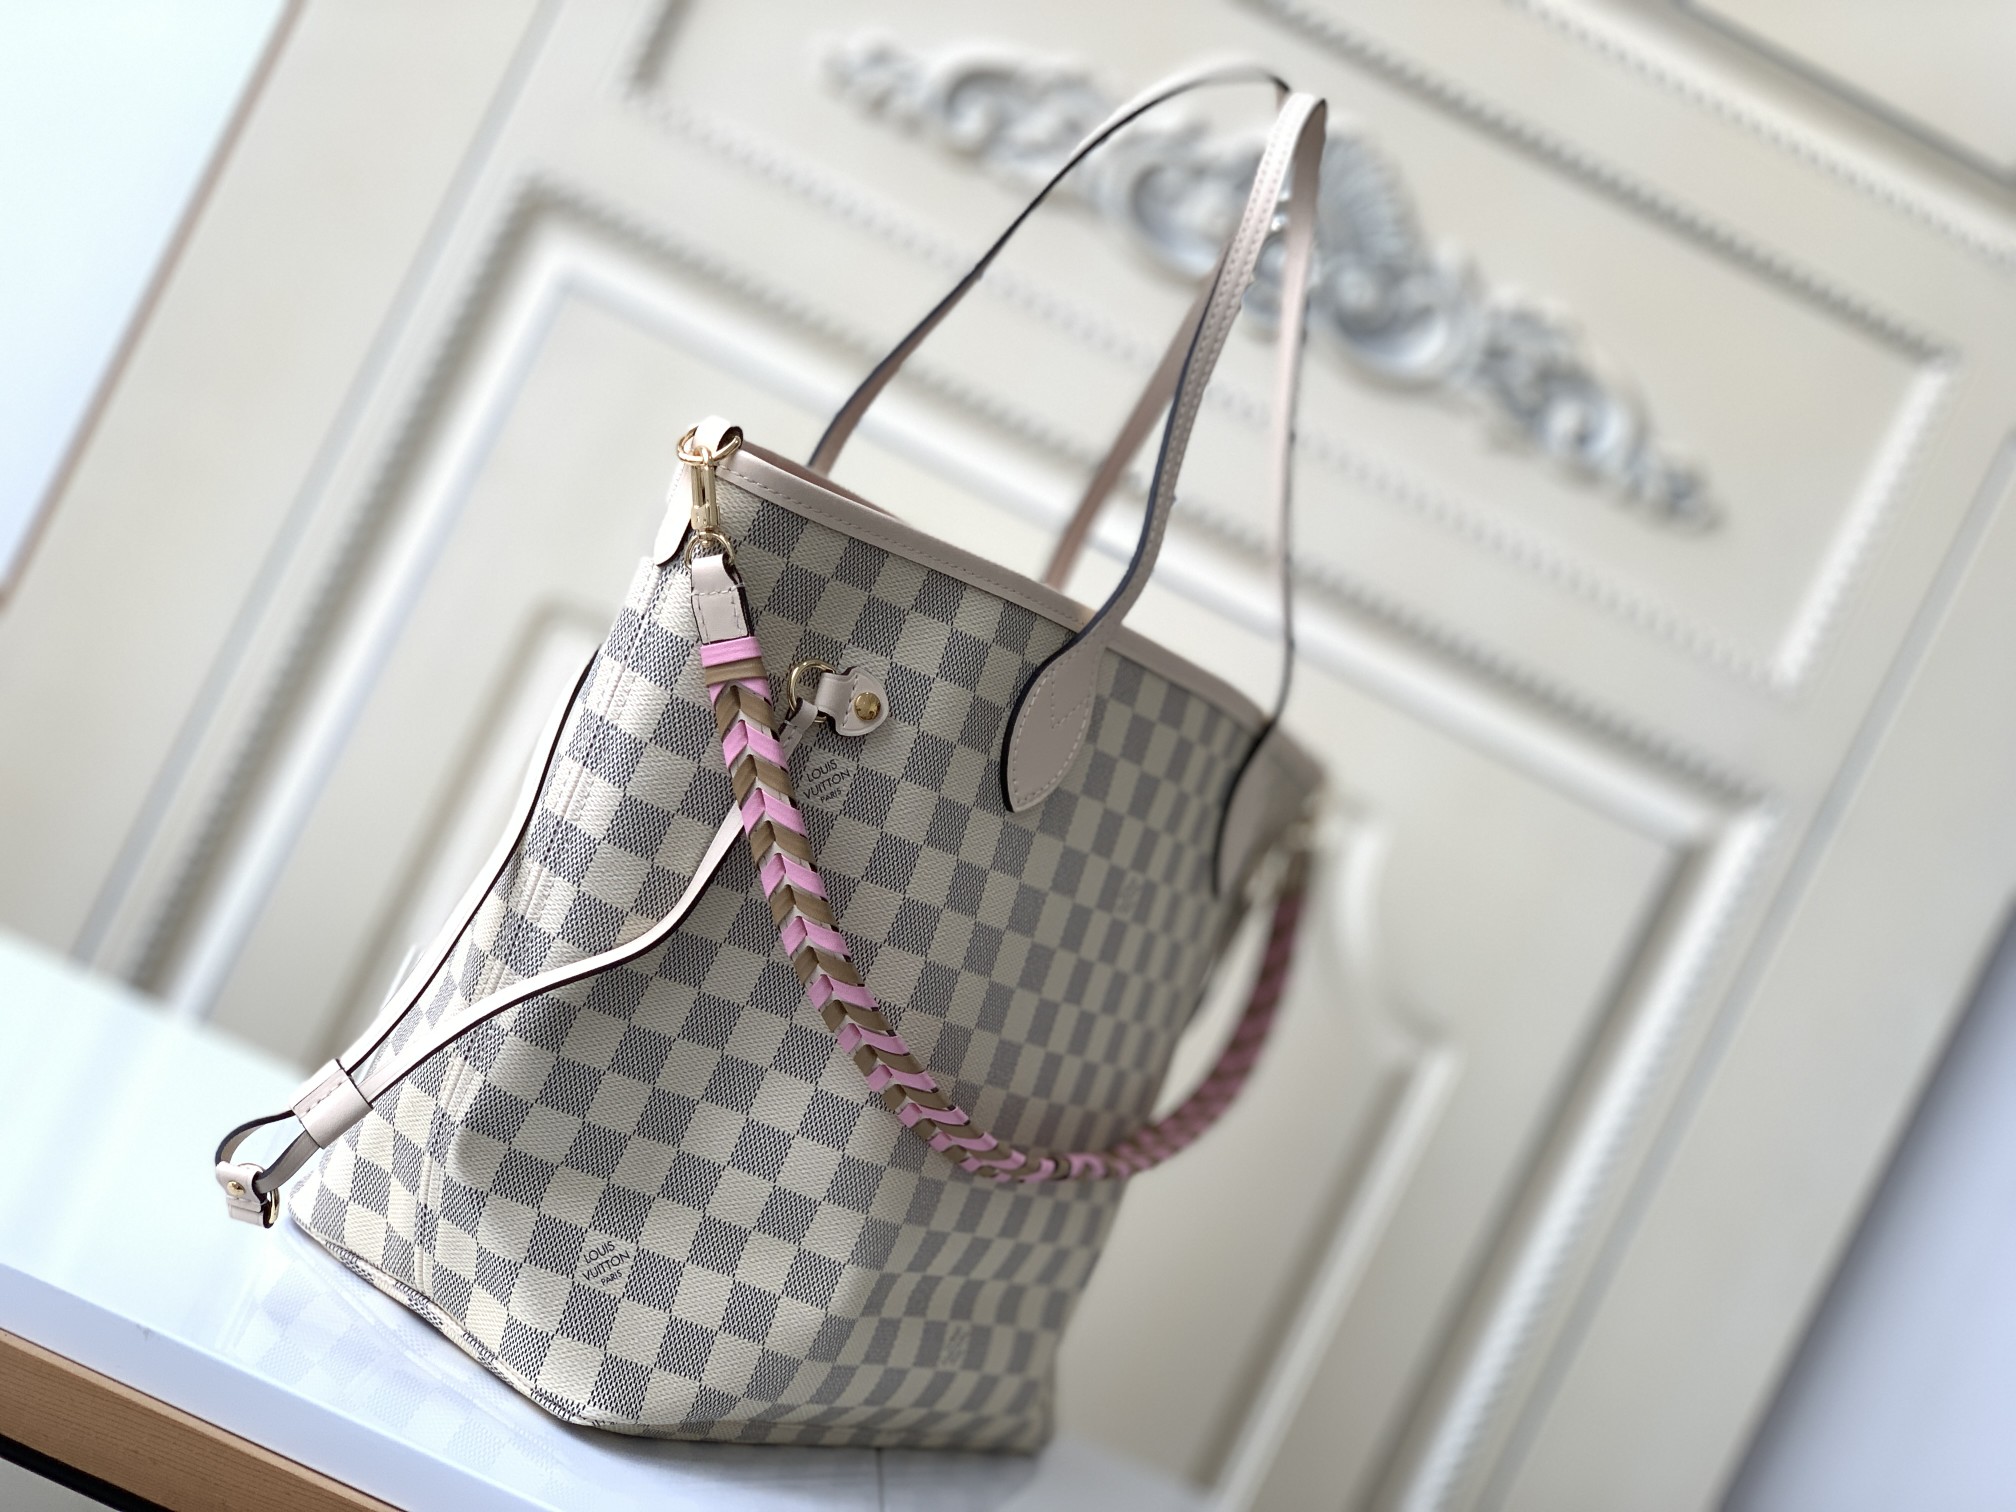 Copy Louis Vuitton N45295 Neverfull MM Tote Damier Azur Coated Canvas